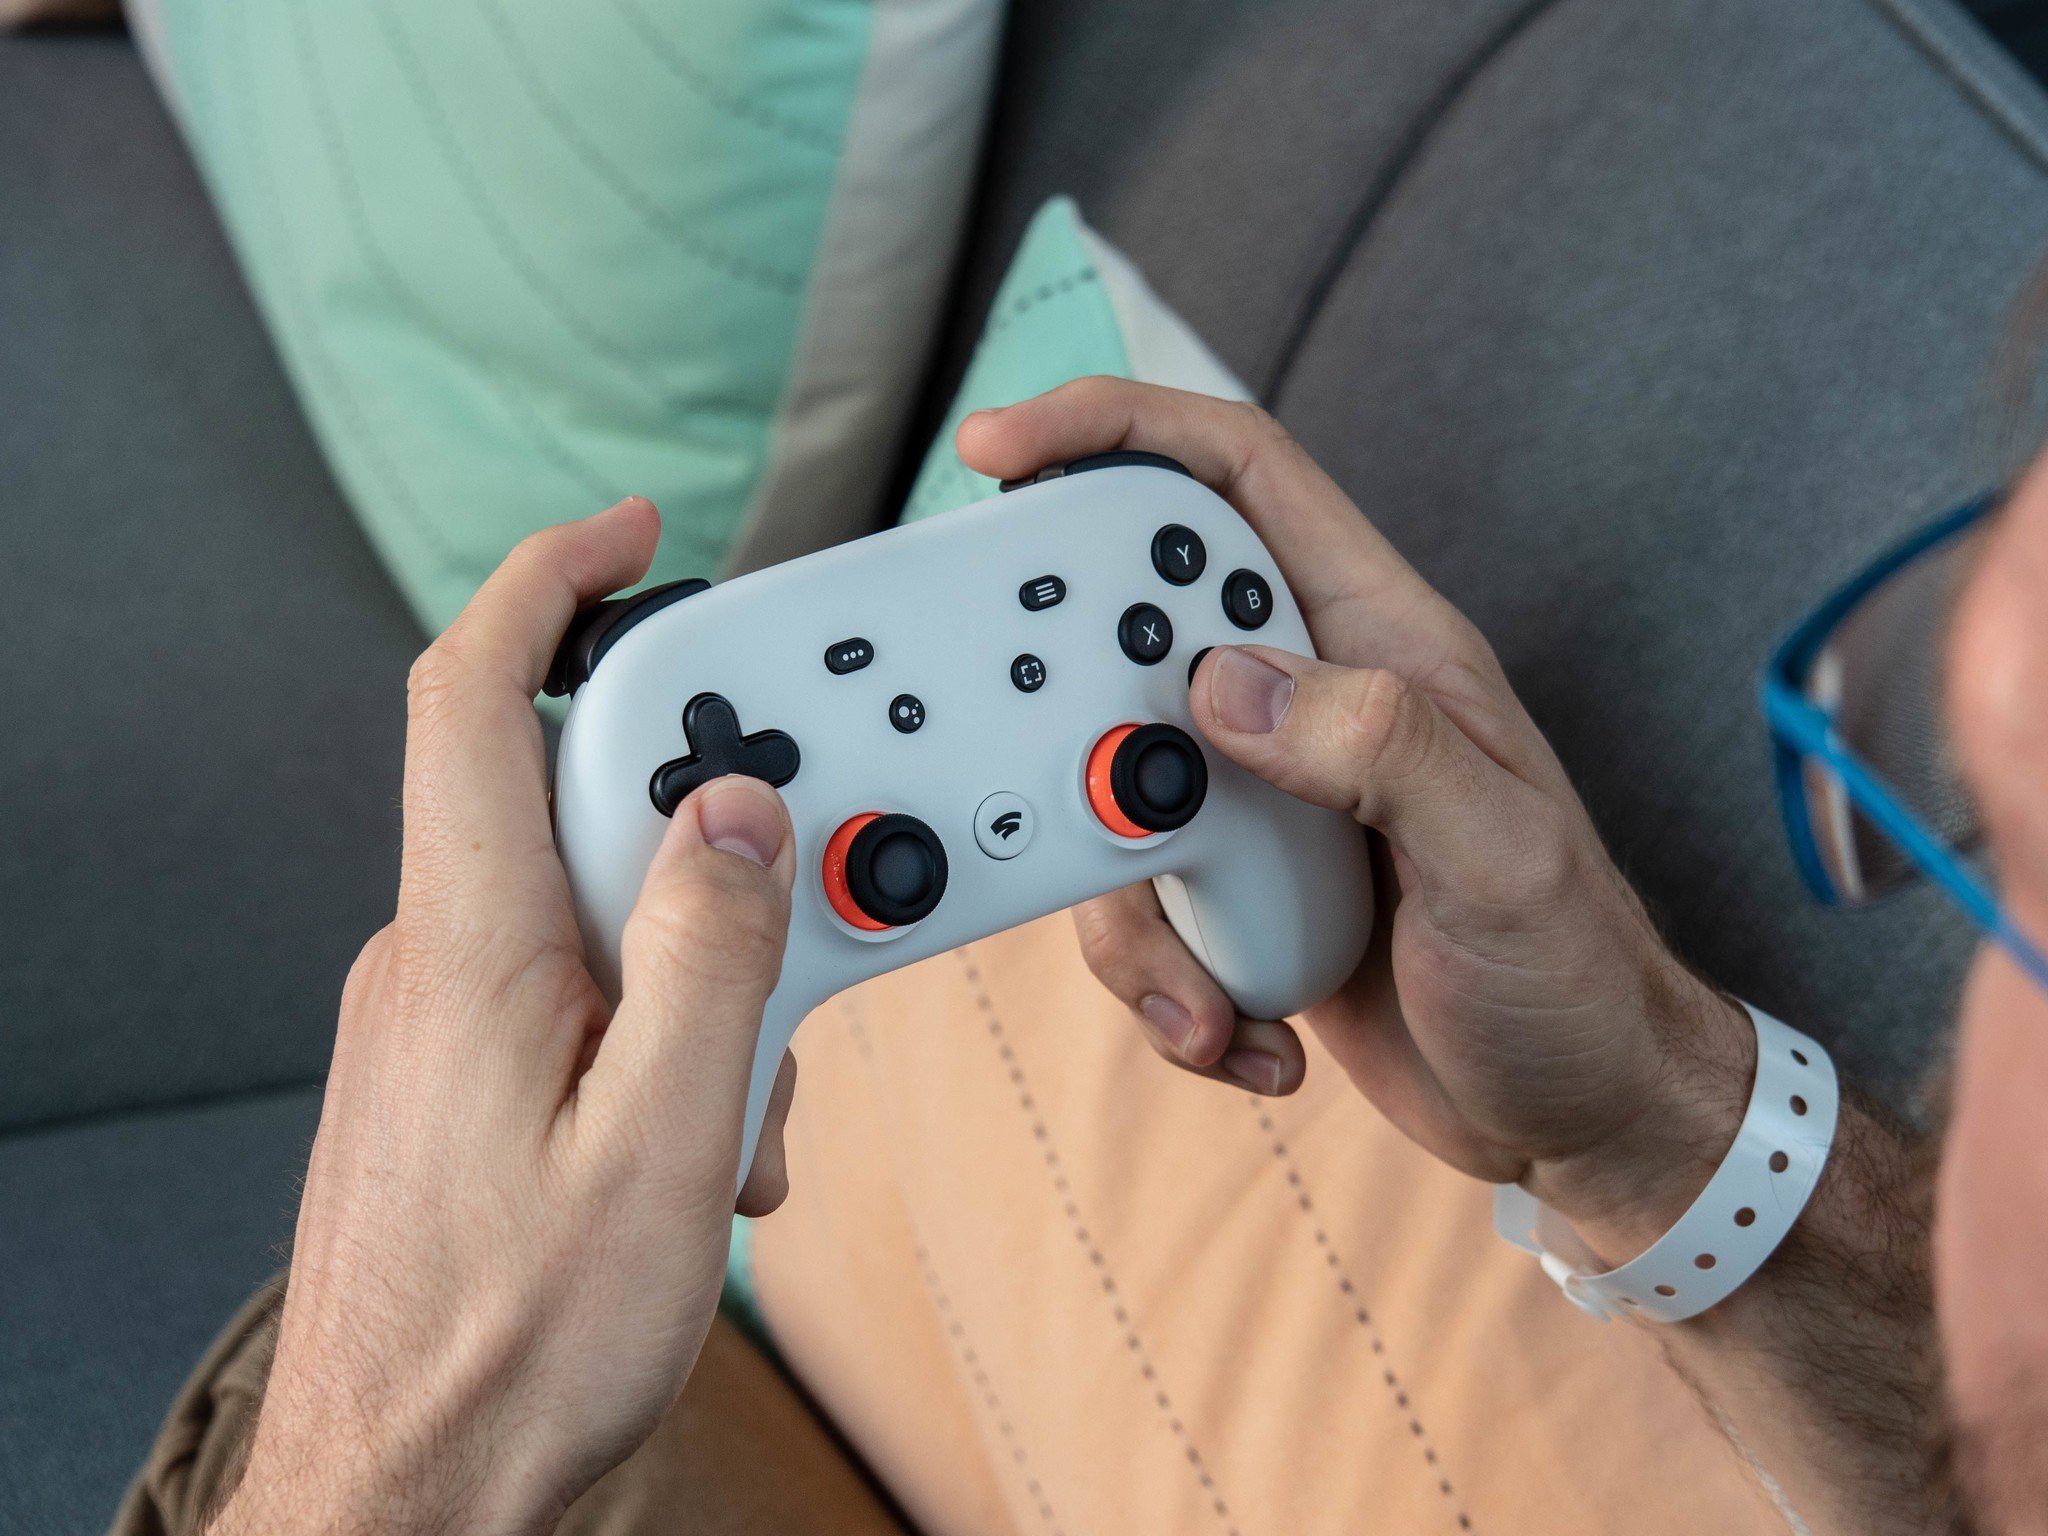 The controller used for Stadia